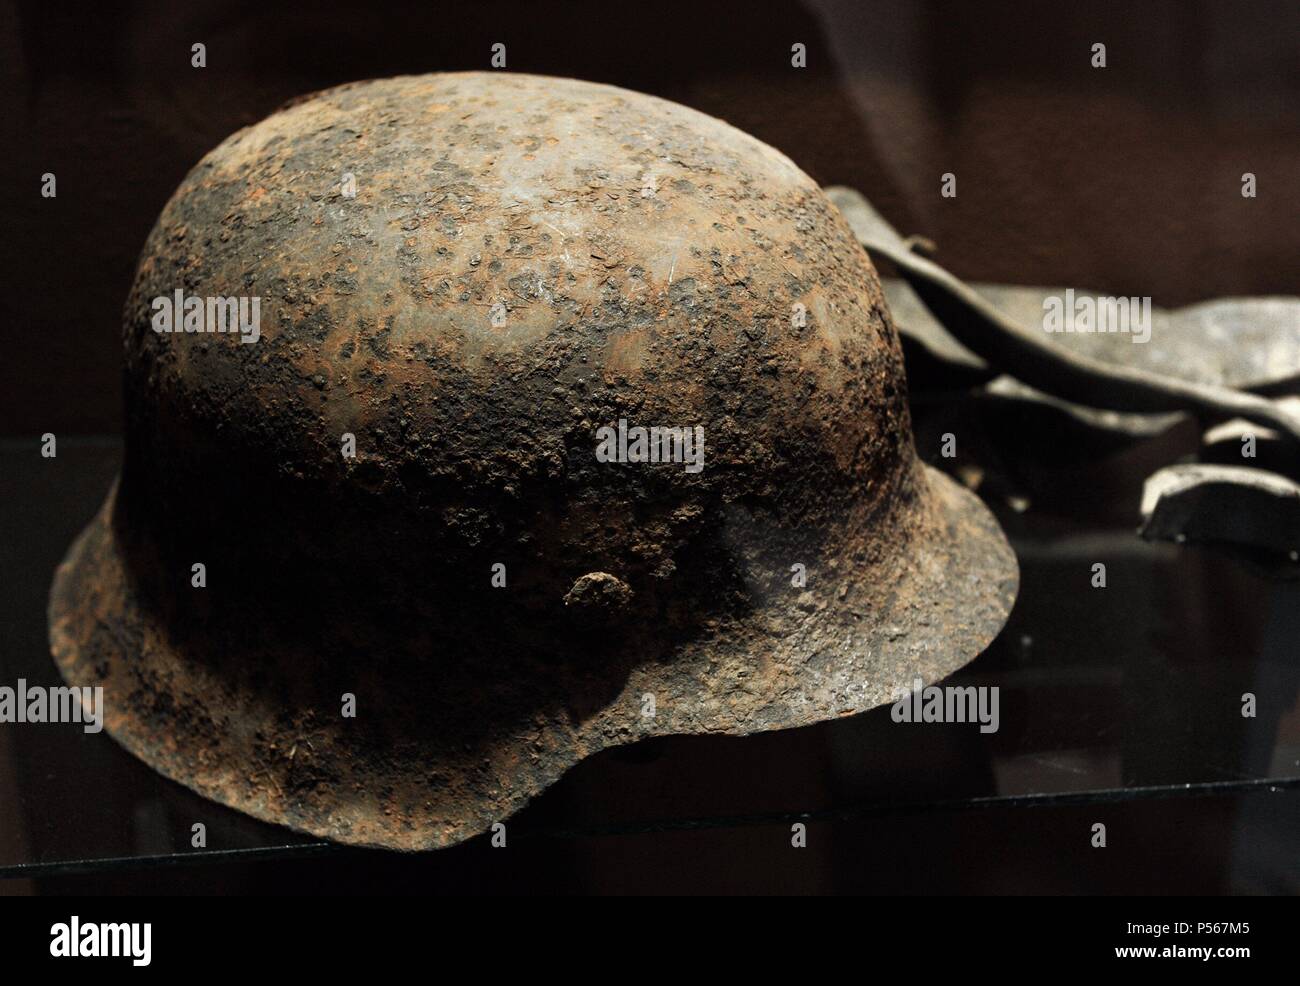 History. World War II. Latvia.  Helmet found in the field of Battle near and More. Over 200 Latvians died between September 26 to 29, 1944. The Division Latvian Legion 19 or 19th Waffen SS Grenadier Division stopped the Red Army's advance towards Riga. The objects were excavated between 1994 and 1997. Occupation Museum. Riga. Latvia. Stock Photo